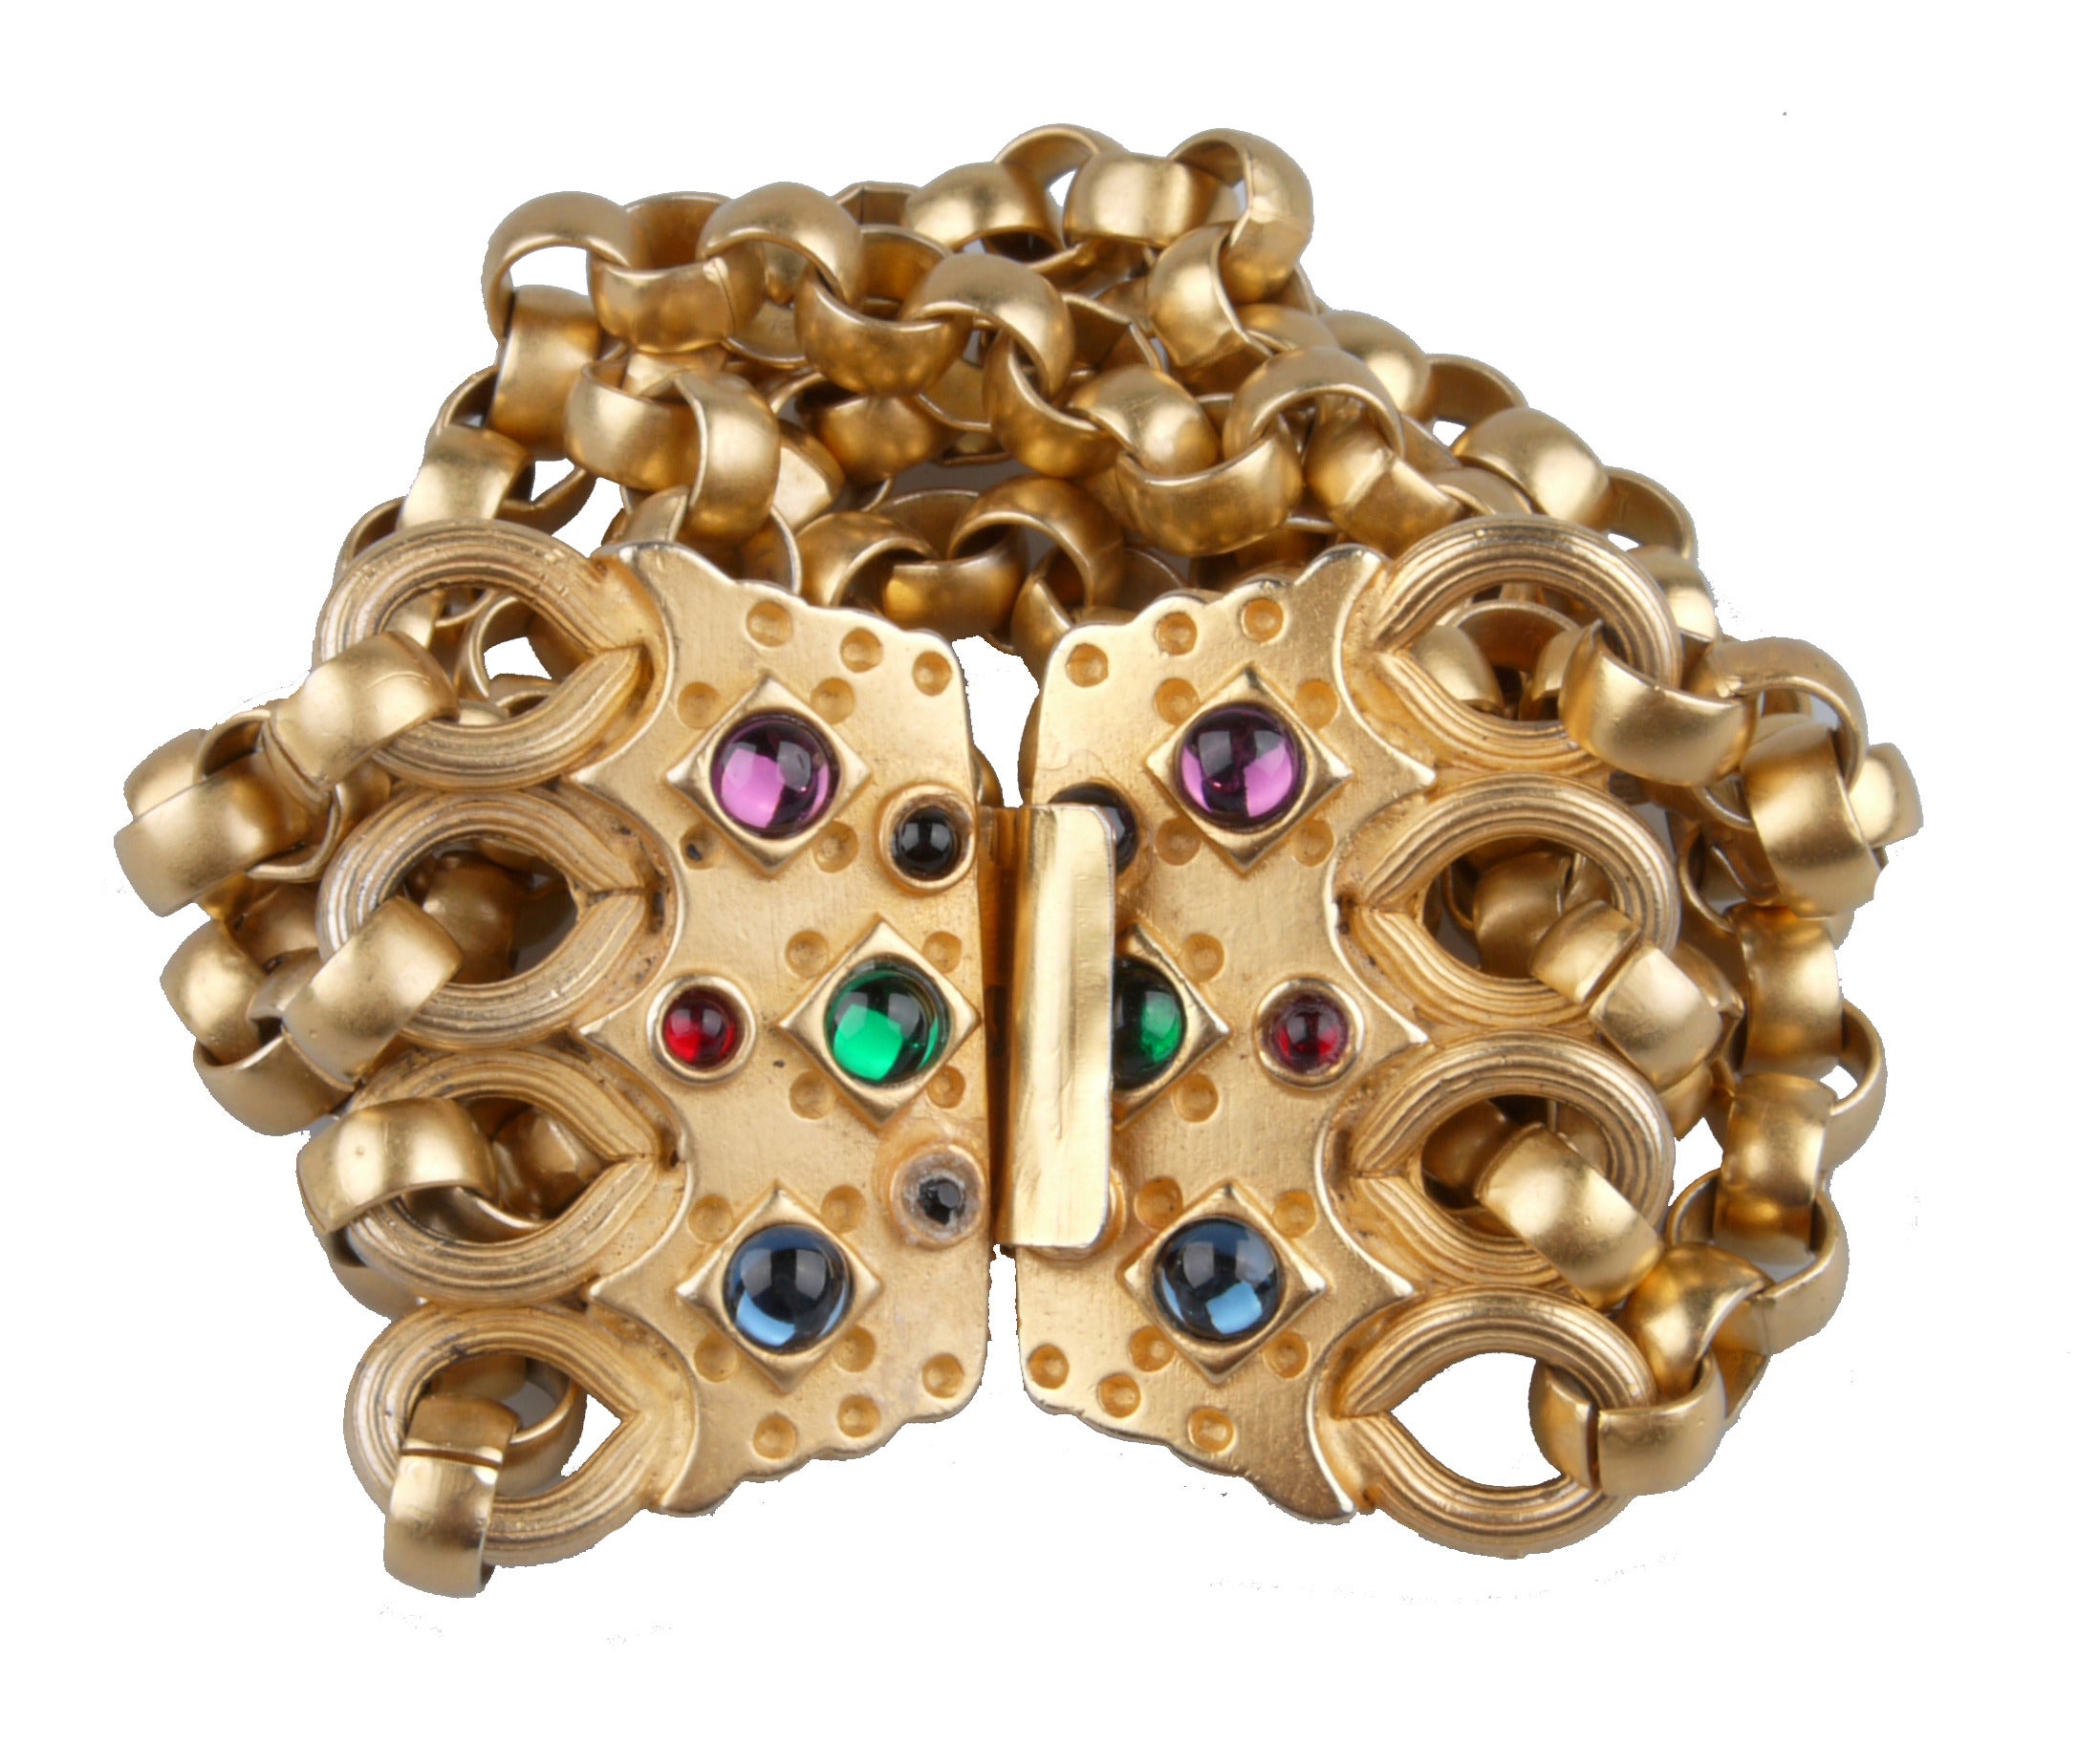 Gold-Tone Bracelet with Multicolored Stones